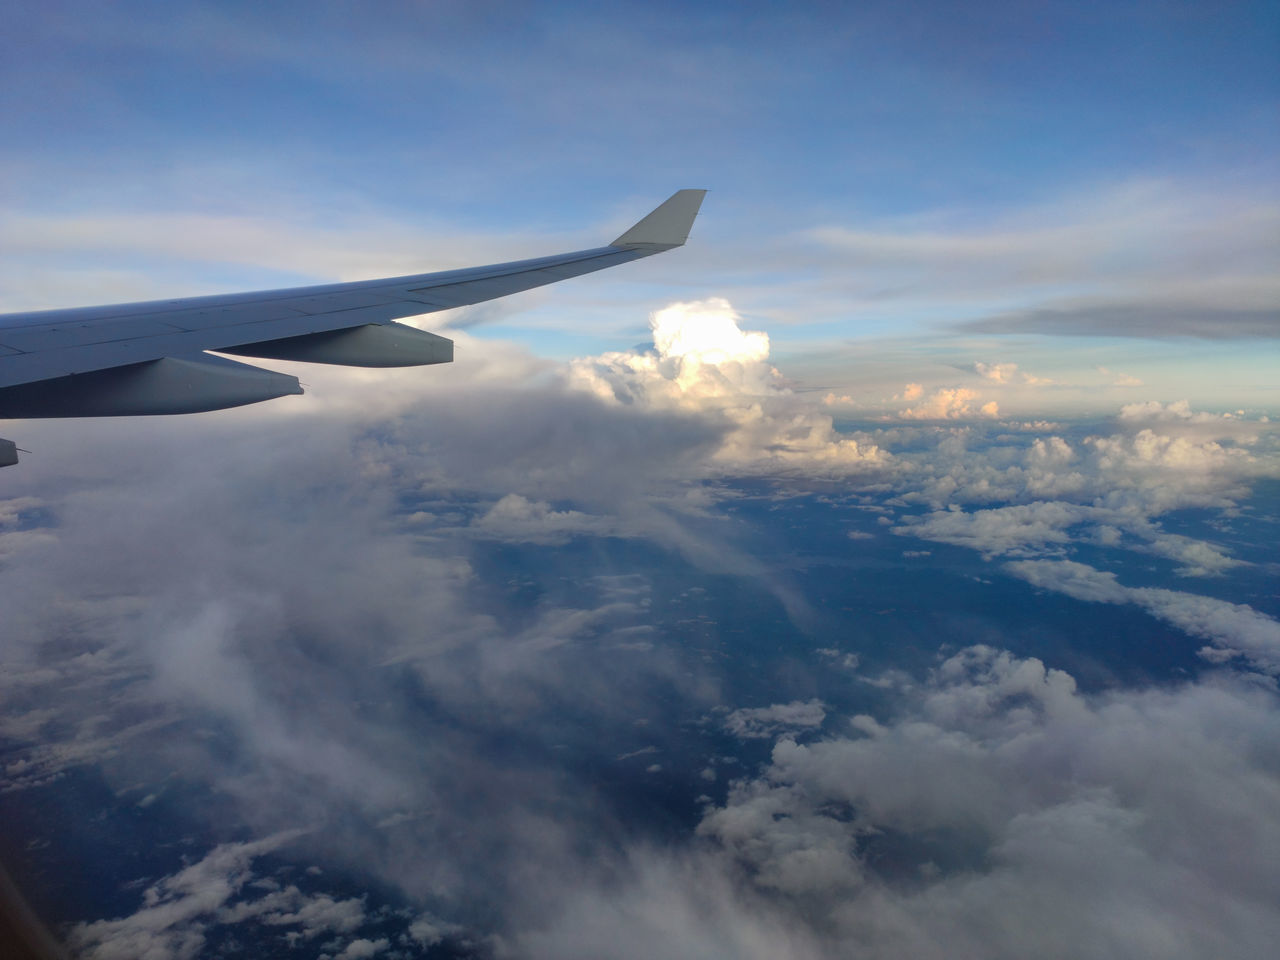 cloud, airplane, air vehicle, sky, flying, aircraft wing, transportation, aerial view, mode of transportation, travel, nature, environment, cloudscape, aircraft, air travel, mid-air, journey, vehicle, no people, scenics - nature, blue, aviation, beauty in nature, high up, outdoors, motion, day, wing, on the move, landscape, above, horizon